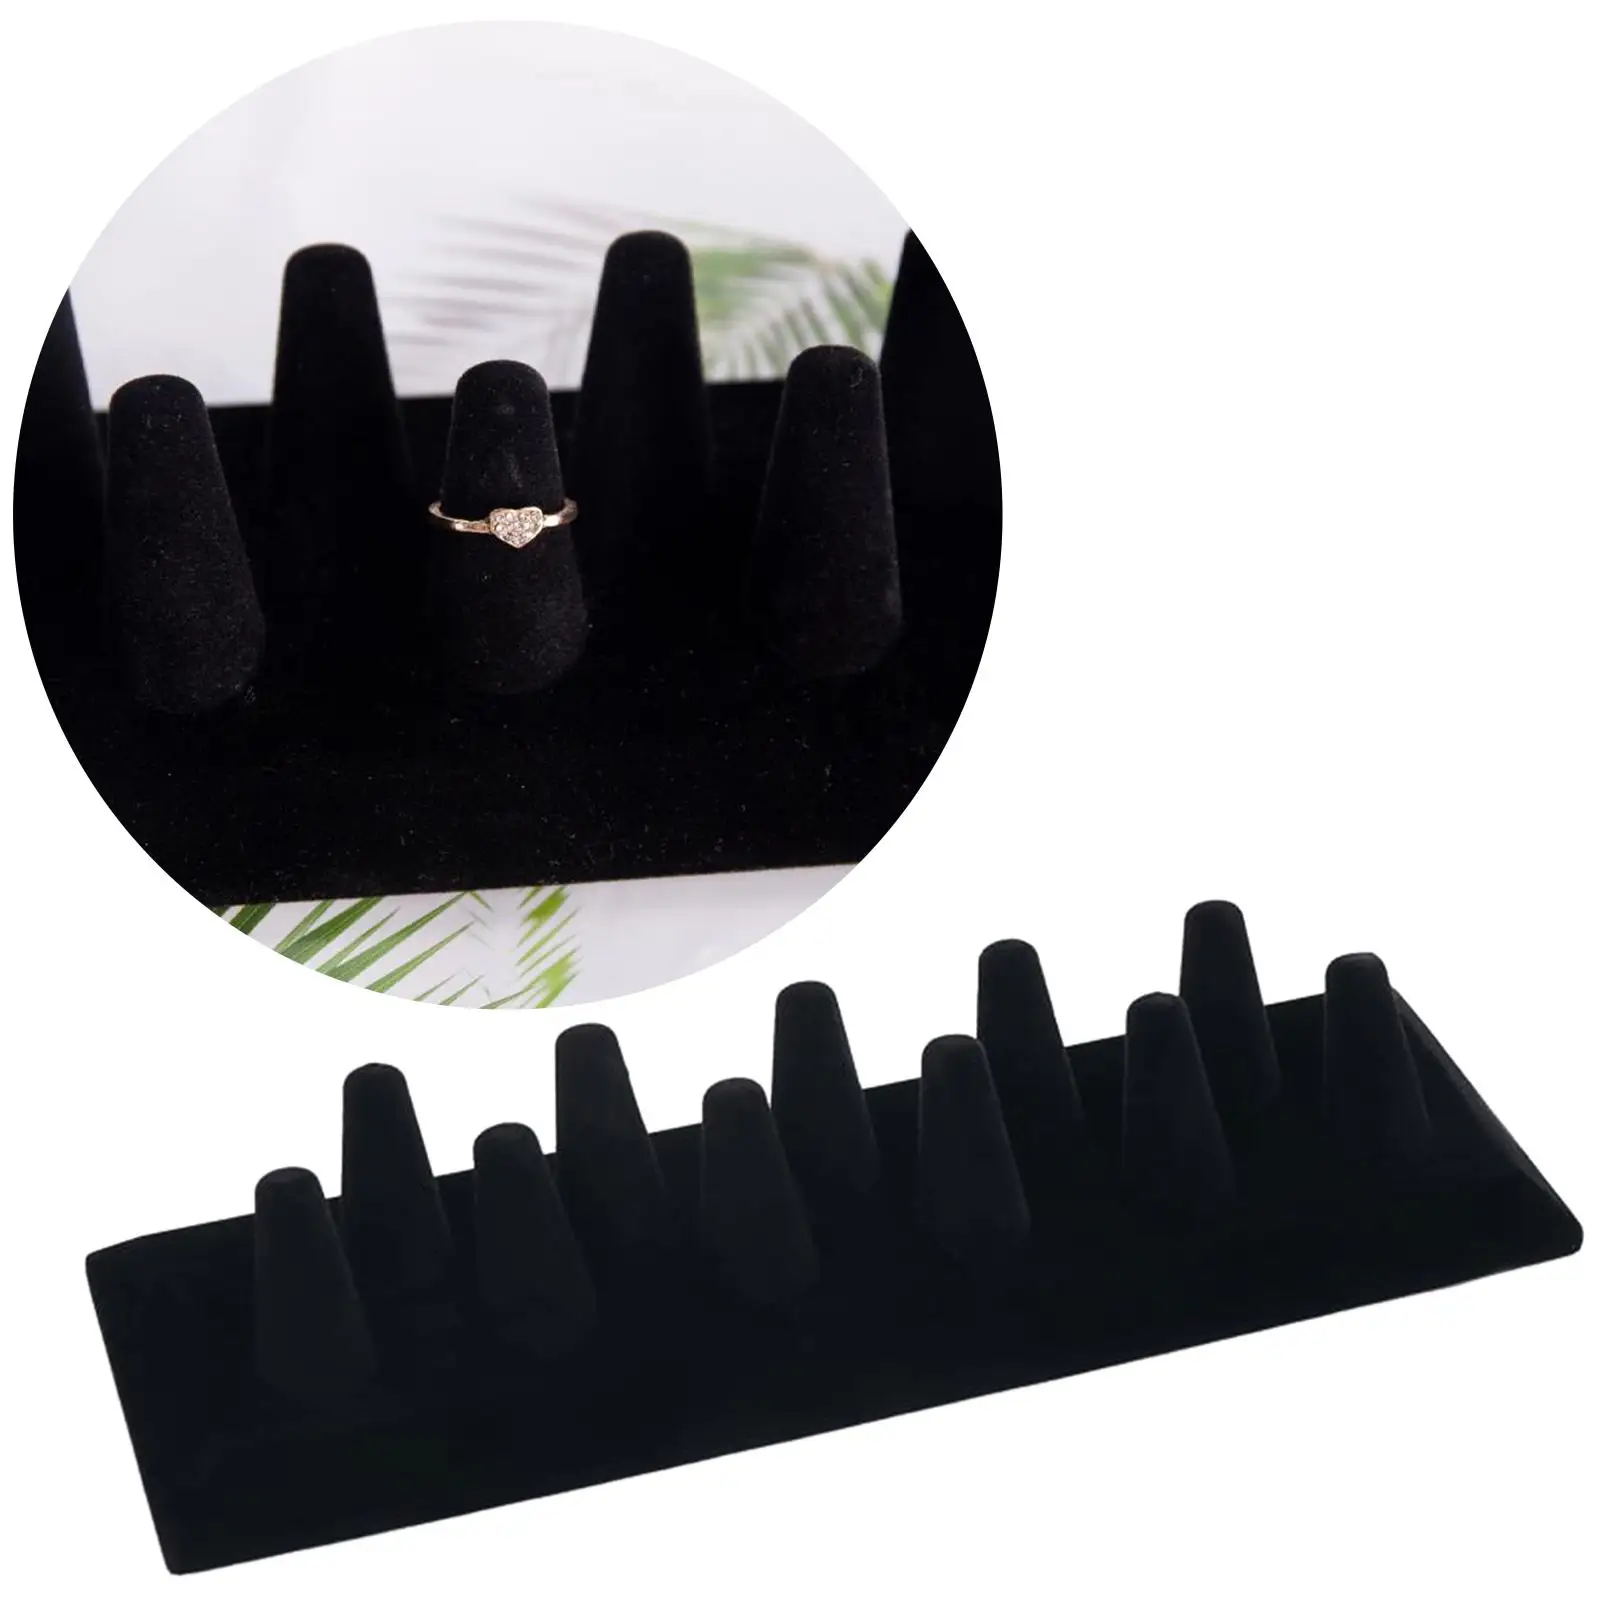 11 Finger Ring Display Stand Velvet Flocking Organizer Jewelry Holder for Retail Shop Shows Exhibitions Organizing Black